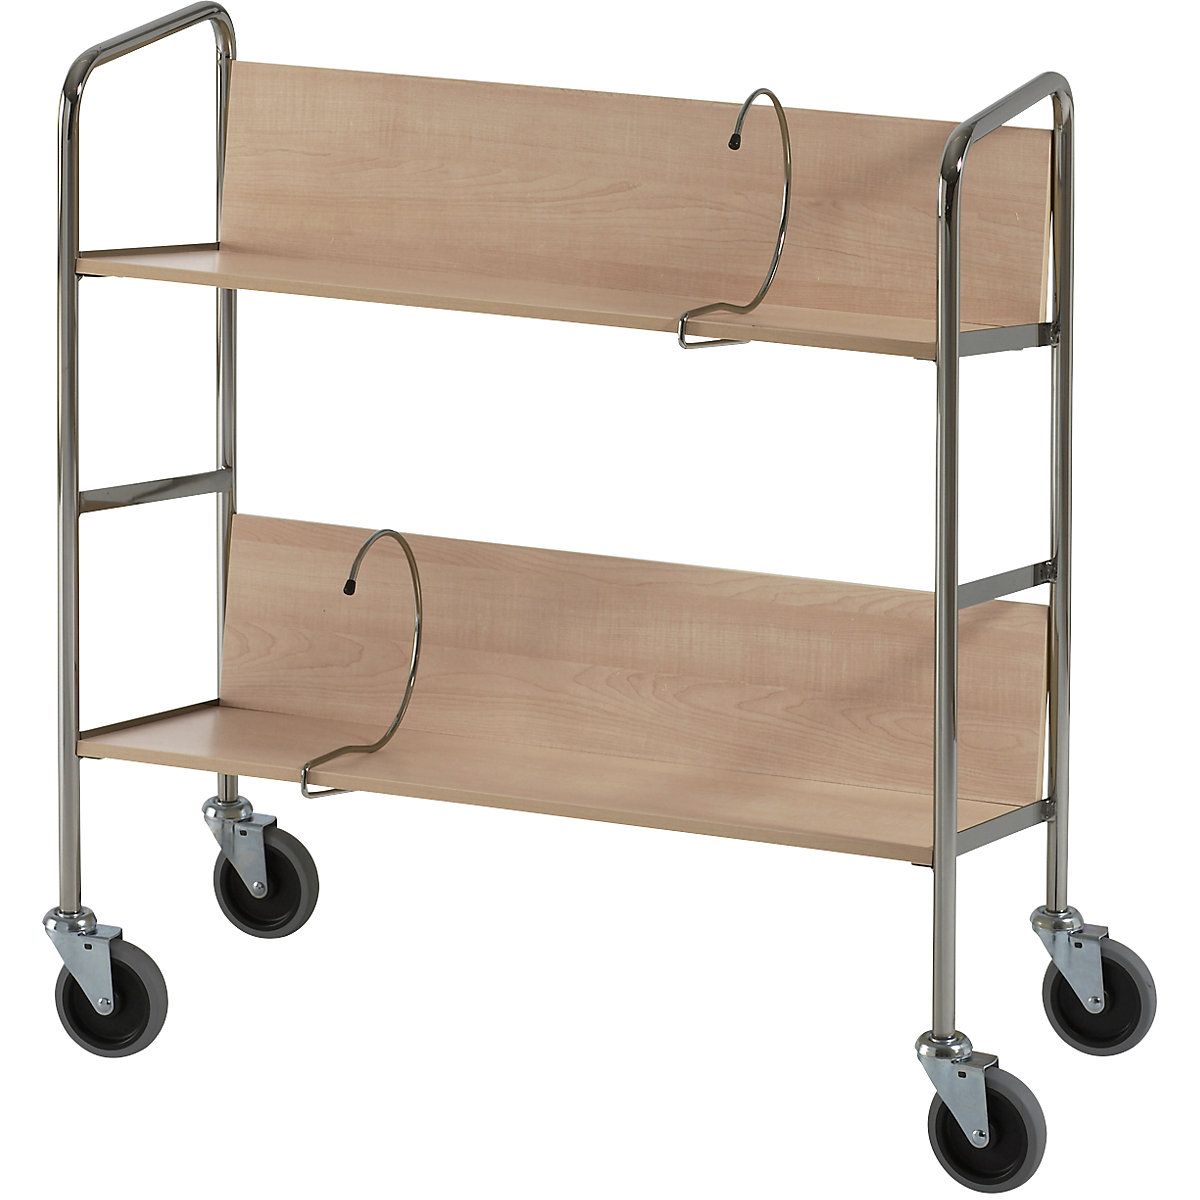 File trolley, chrome plated – HelgeNyberg, 2 shelves, LxWxH 800 x 340 x 840 mm, beech finish, 5+ items-5